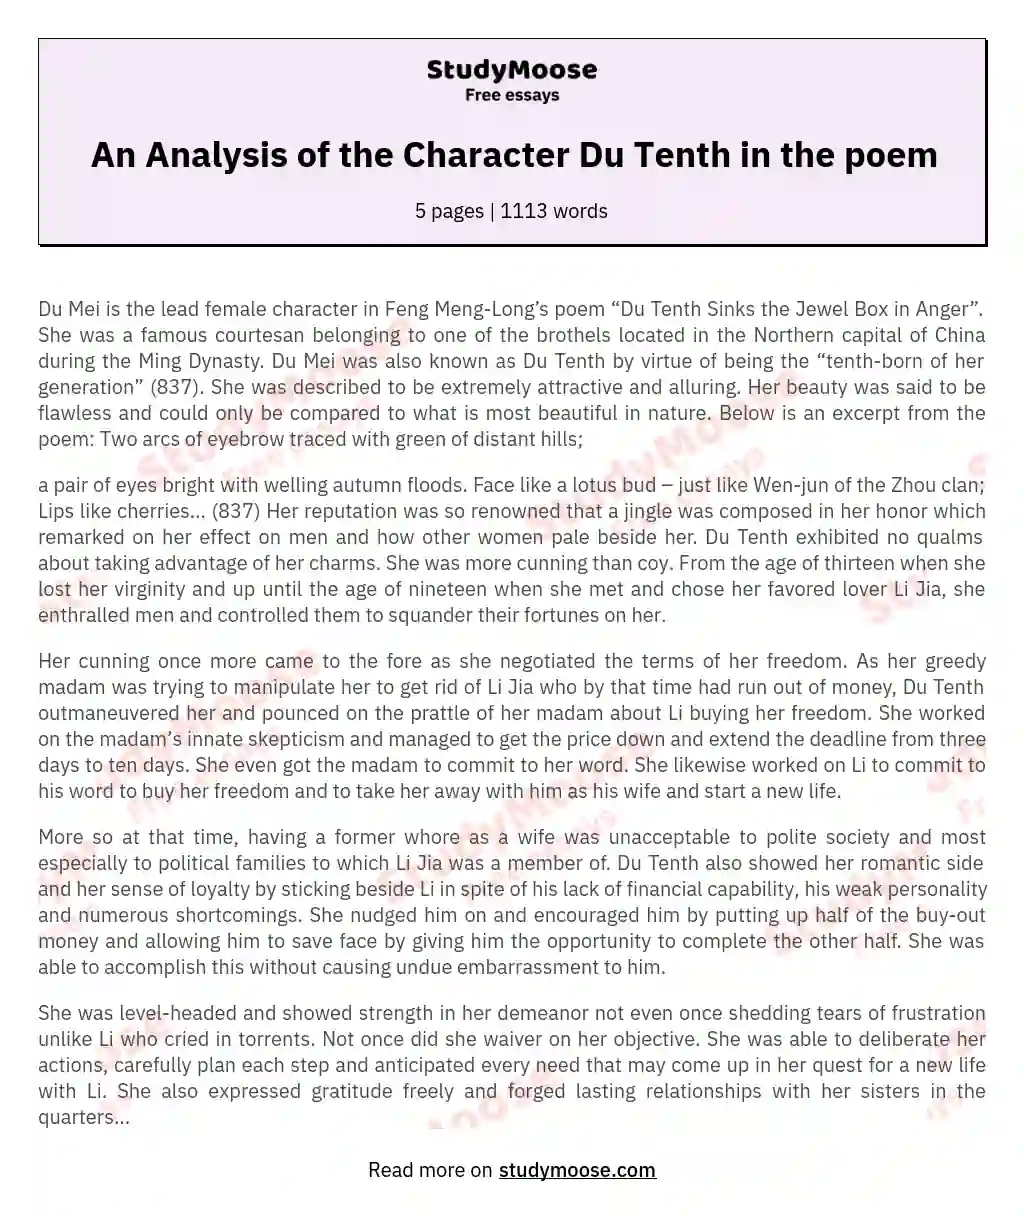 An Analysis of the Character Du Tenth in the poem